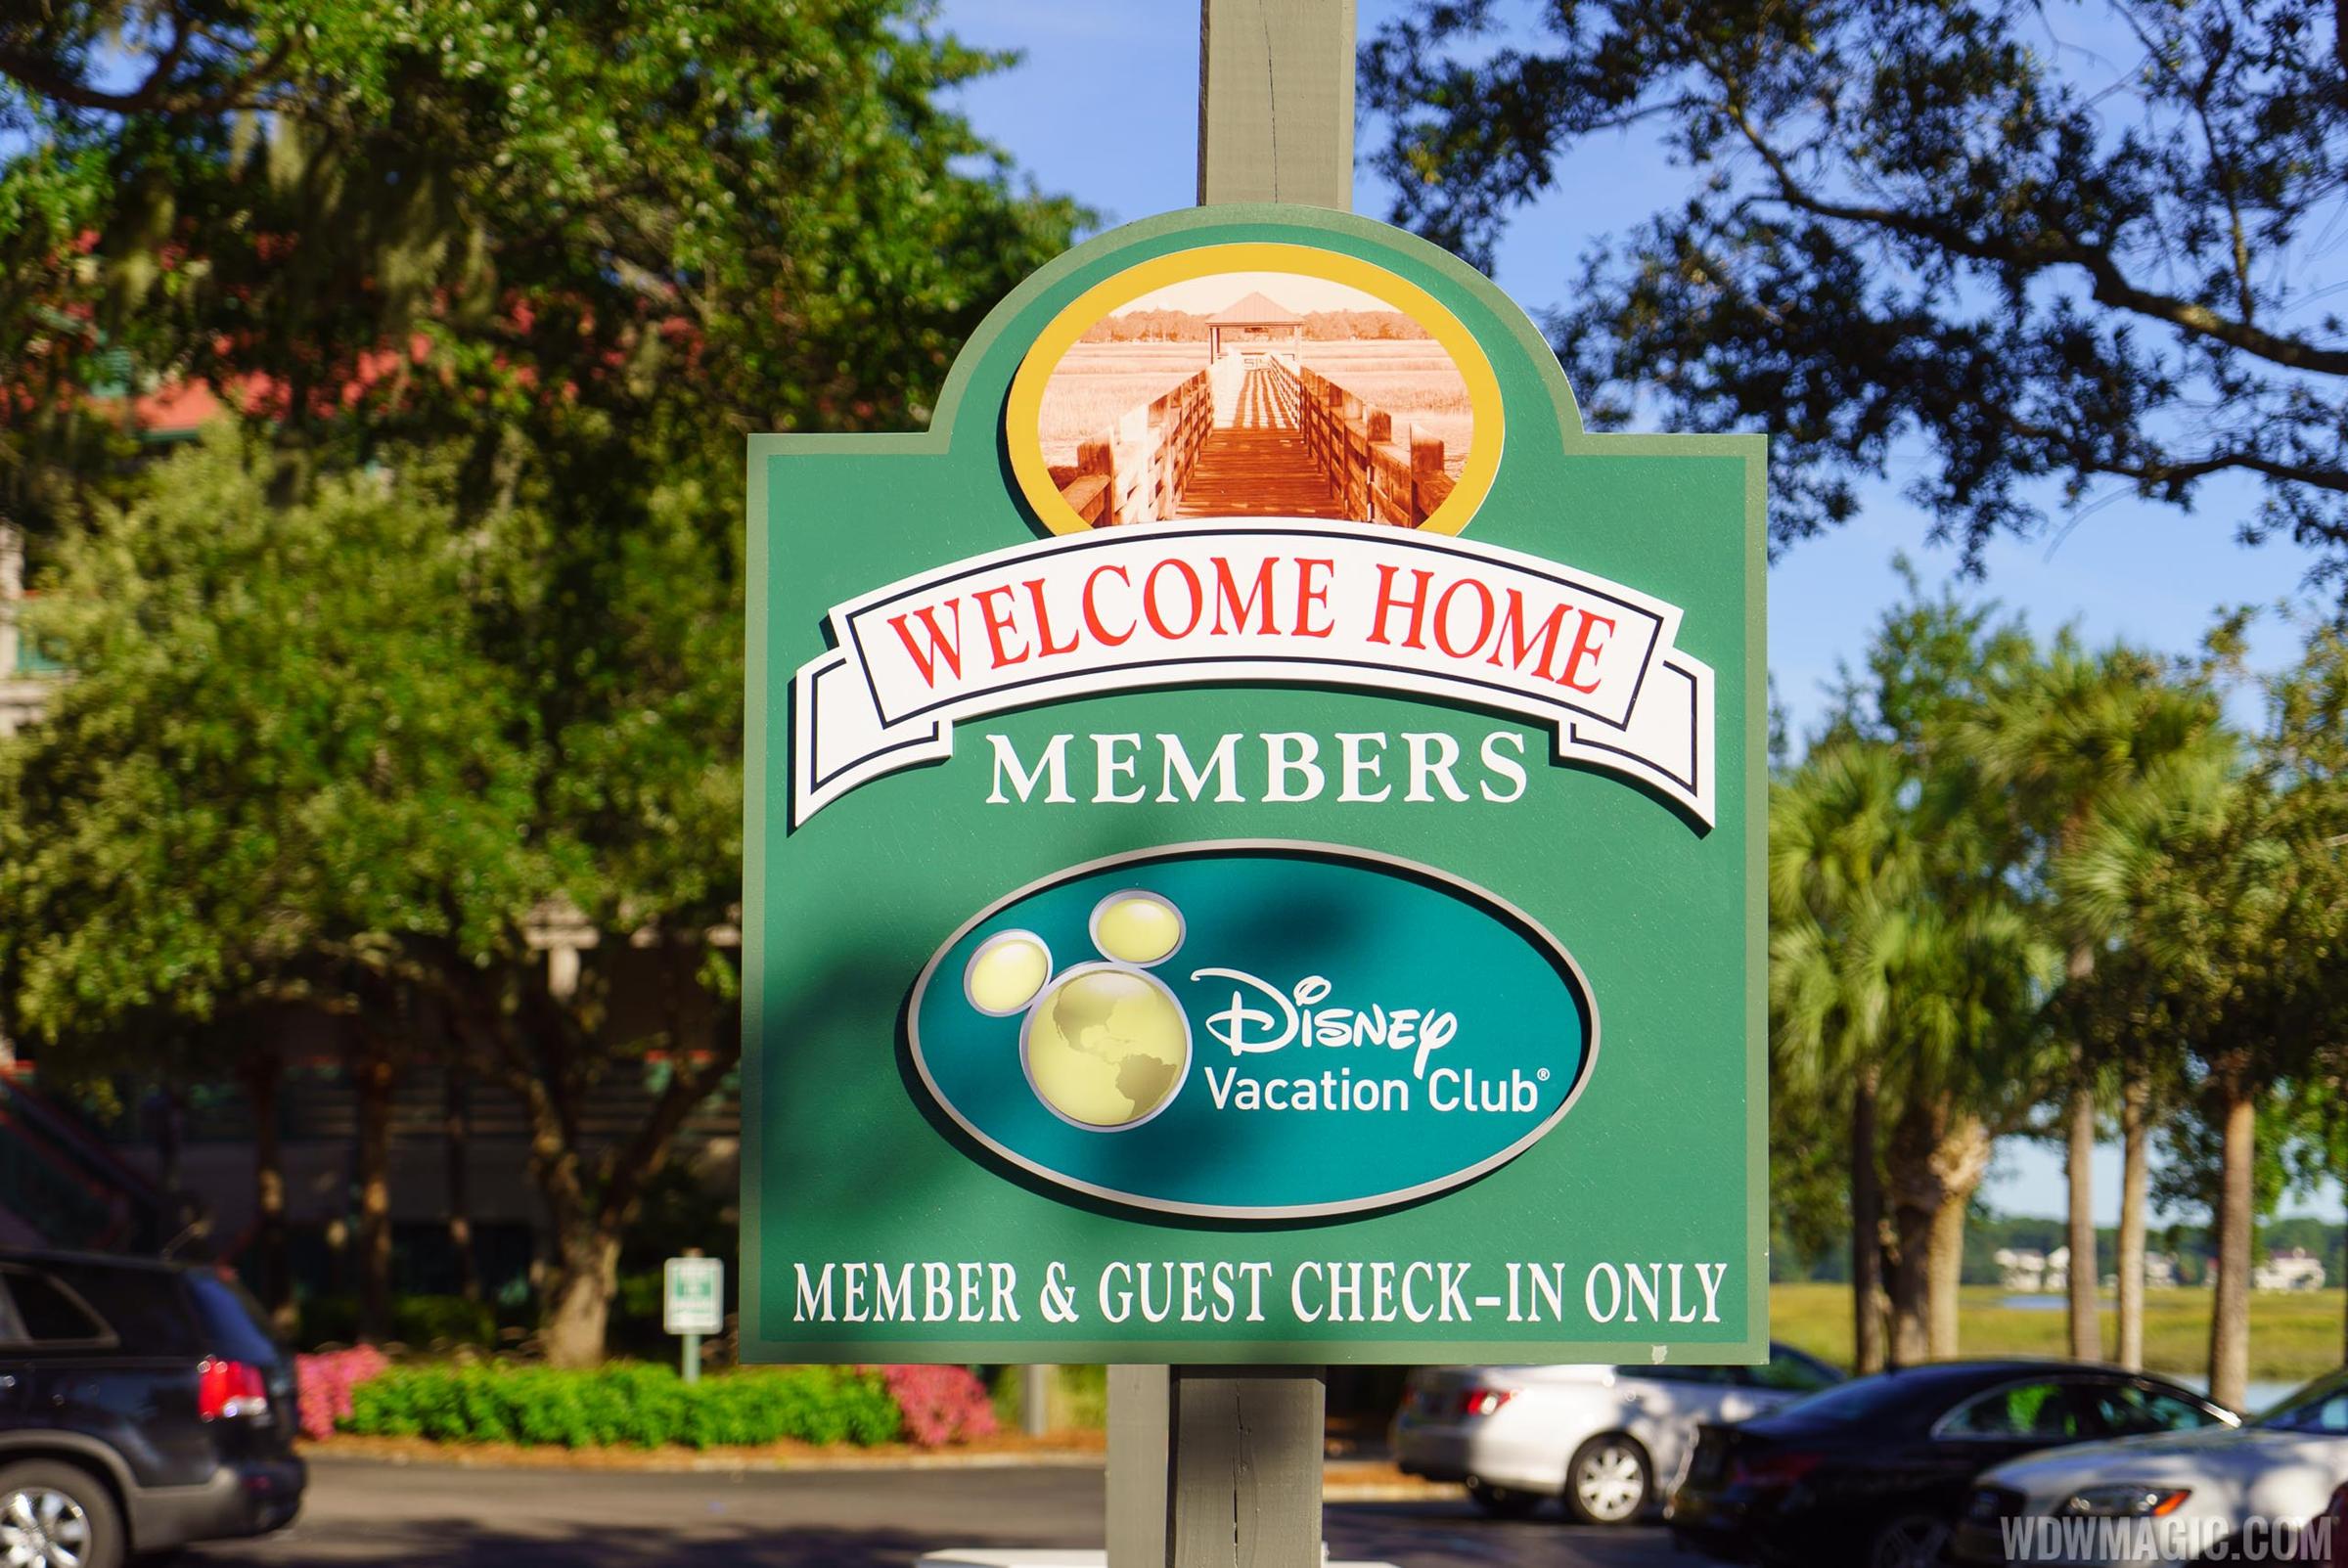 Disney Vacation Club Moonlight Magic after-hours events continue